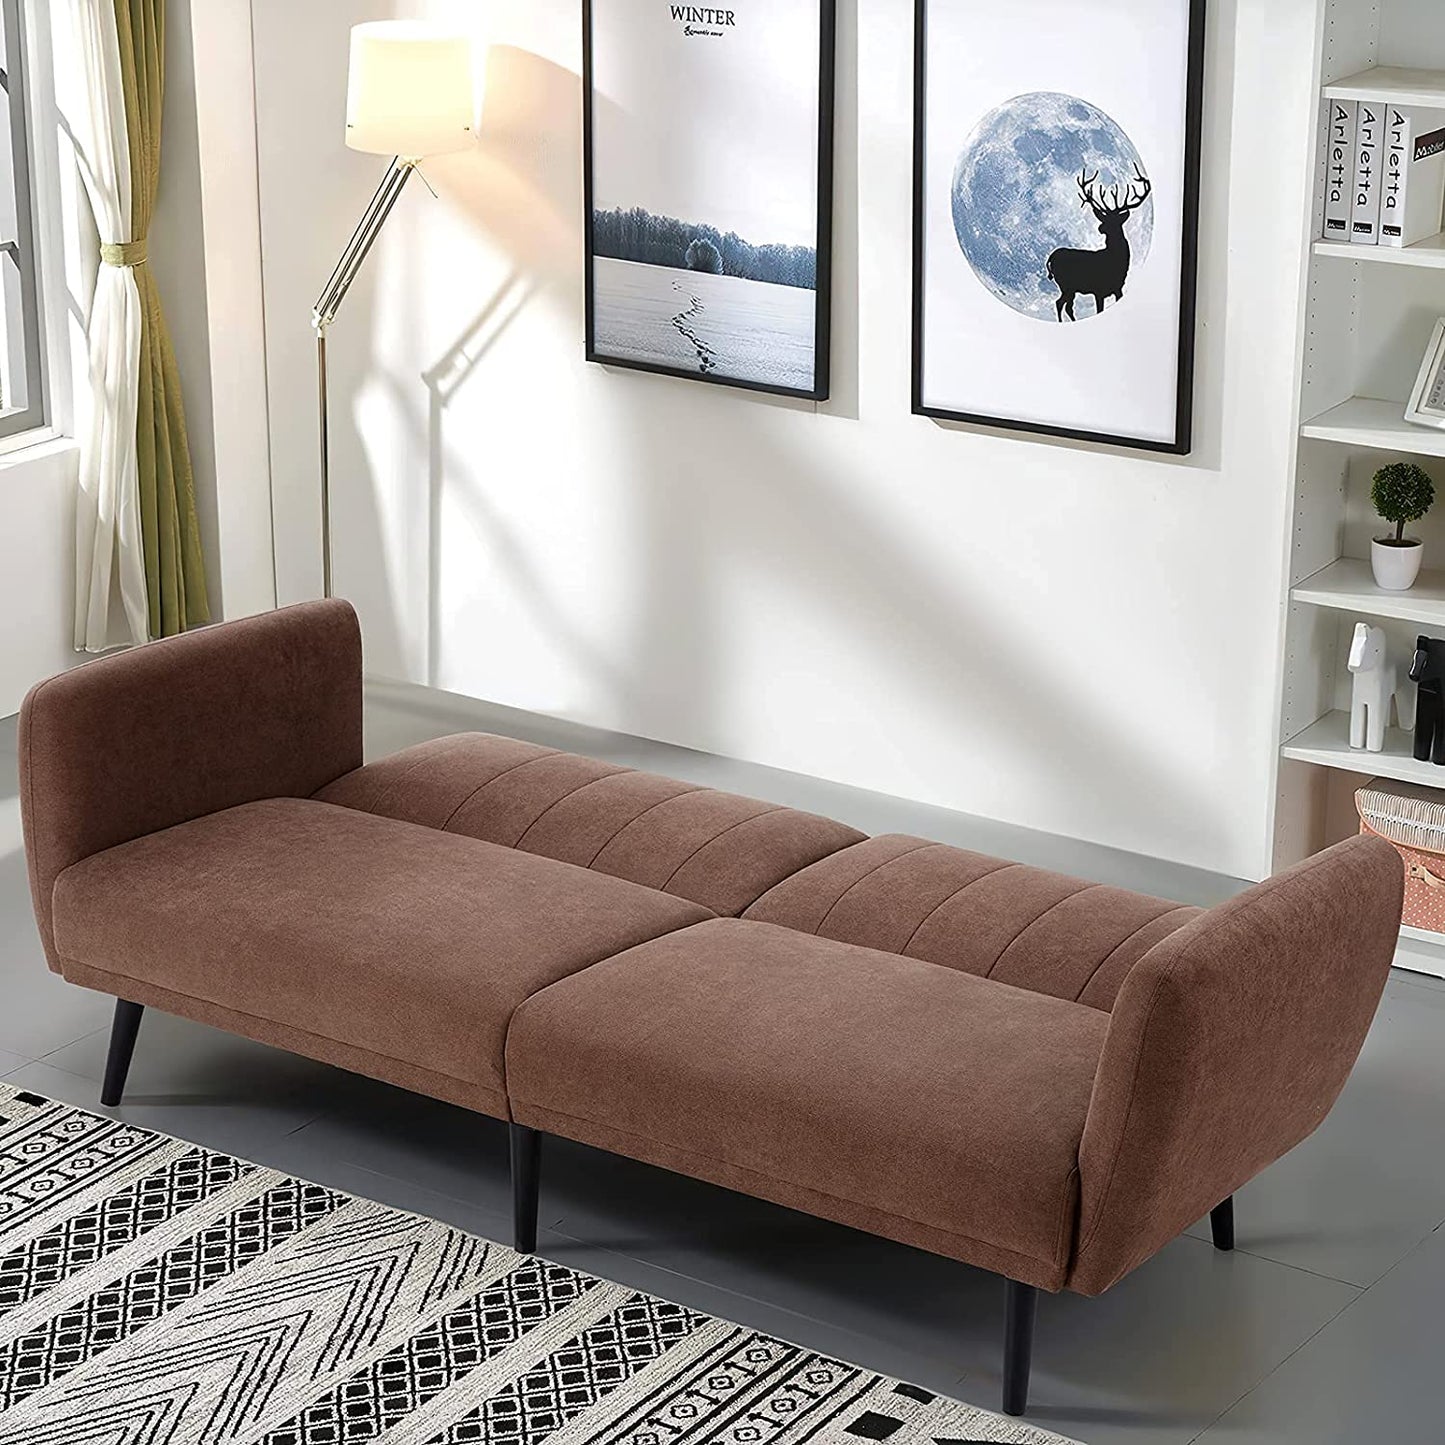 Sofa Cum Beds Folding Loveseat for Living Room, Bedroom, Apartment